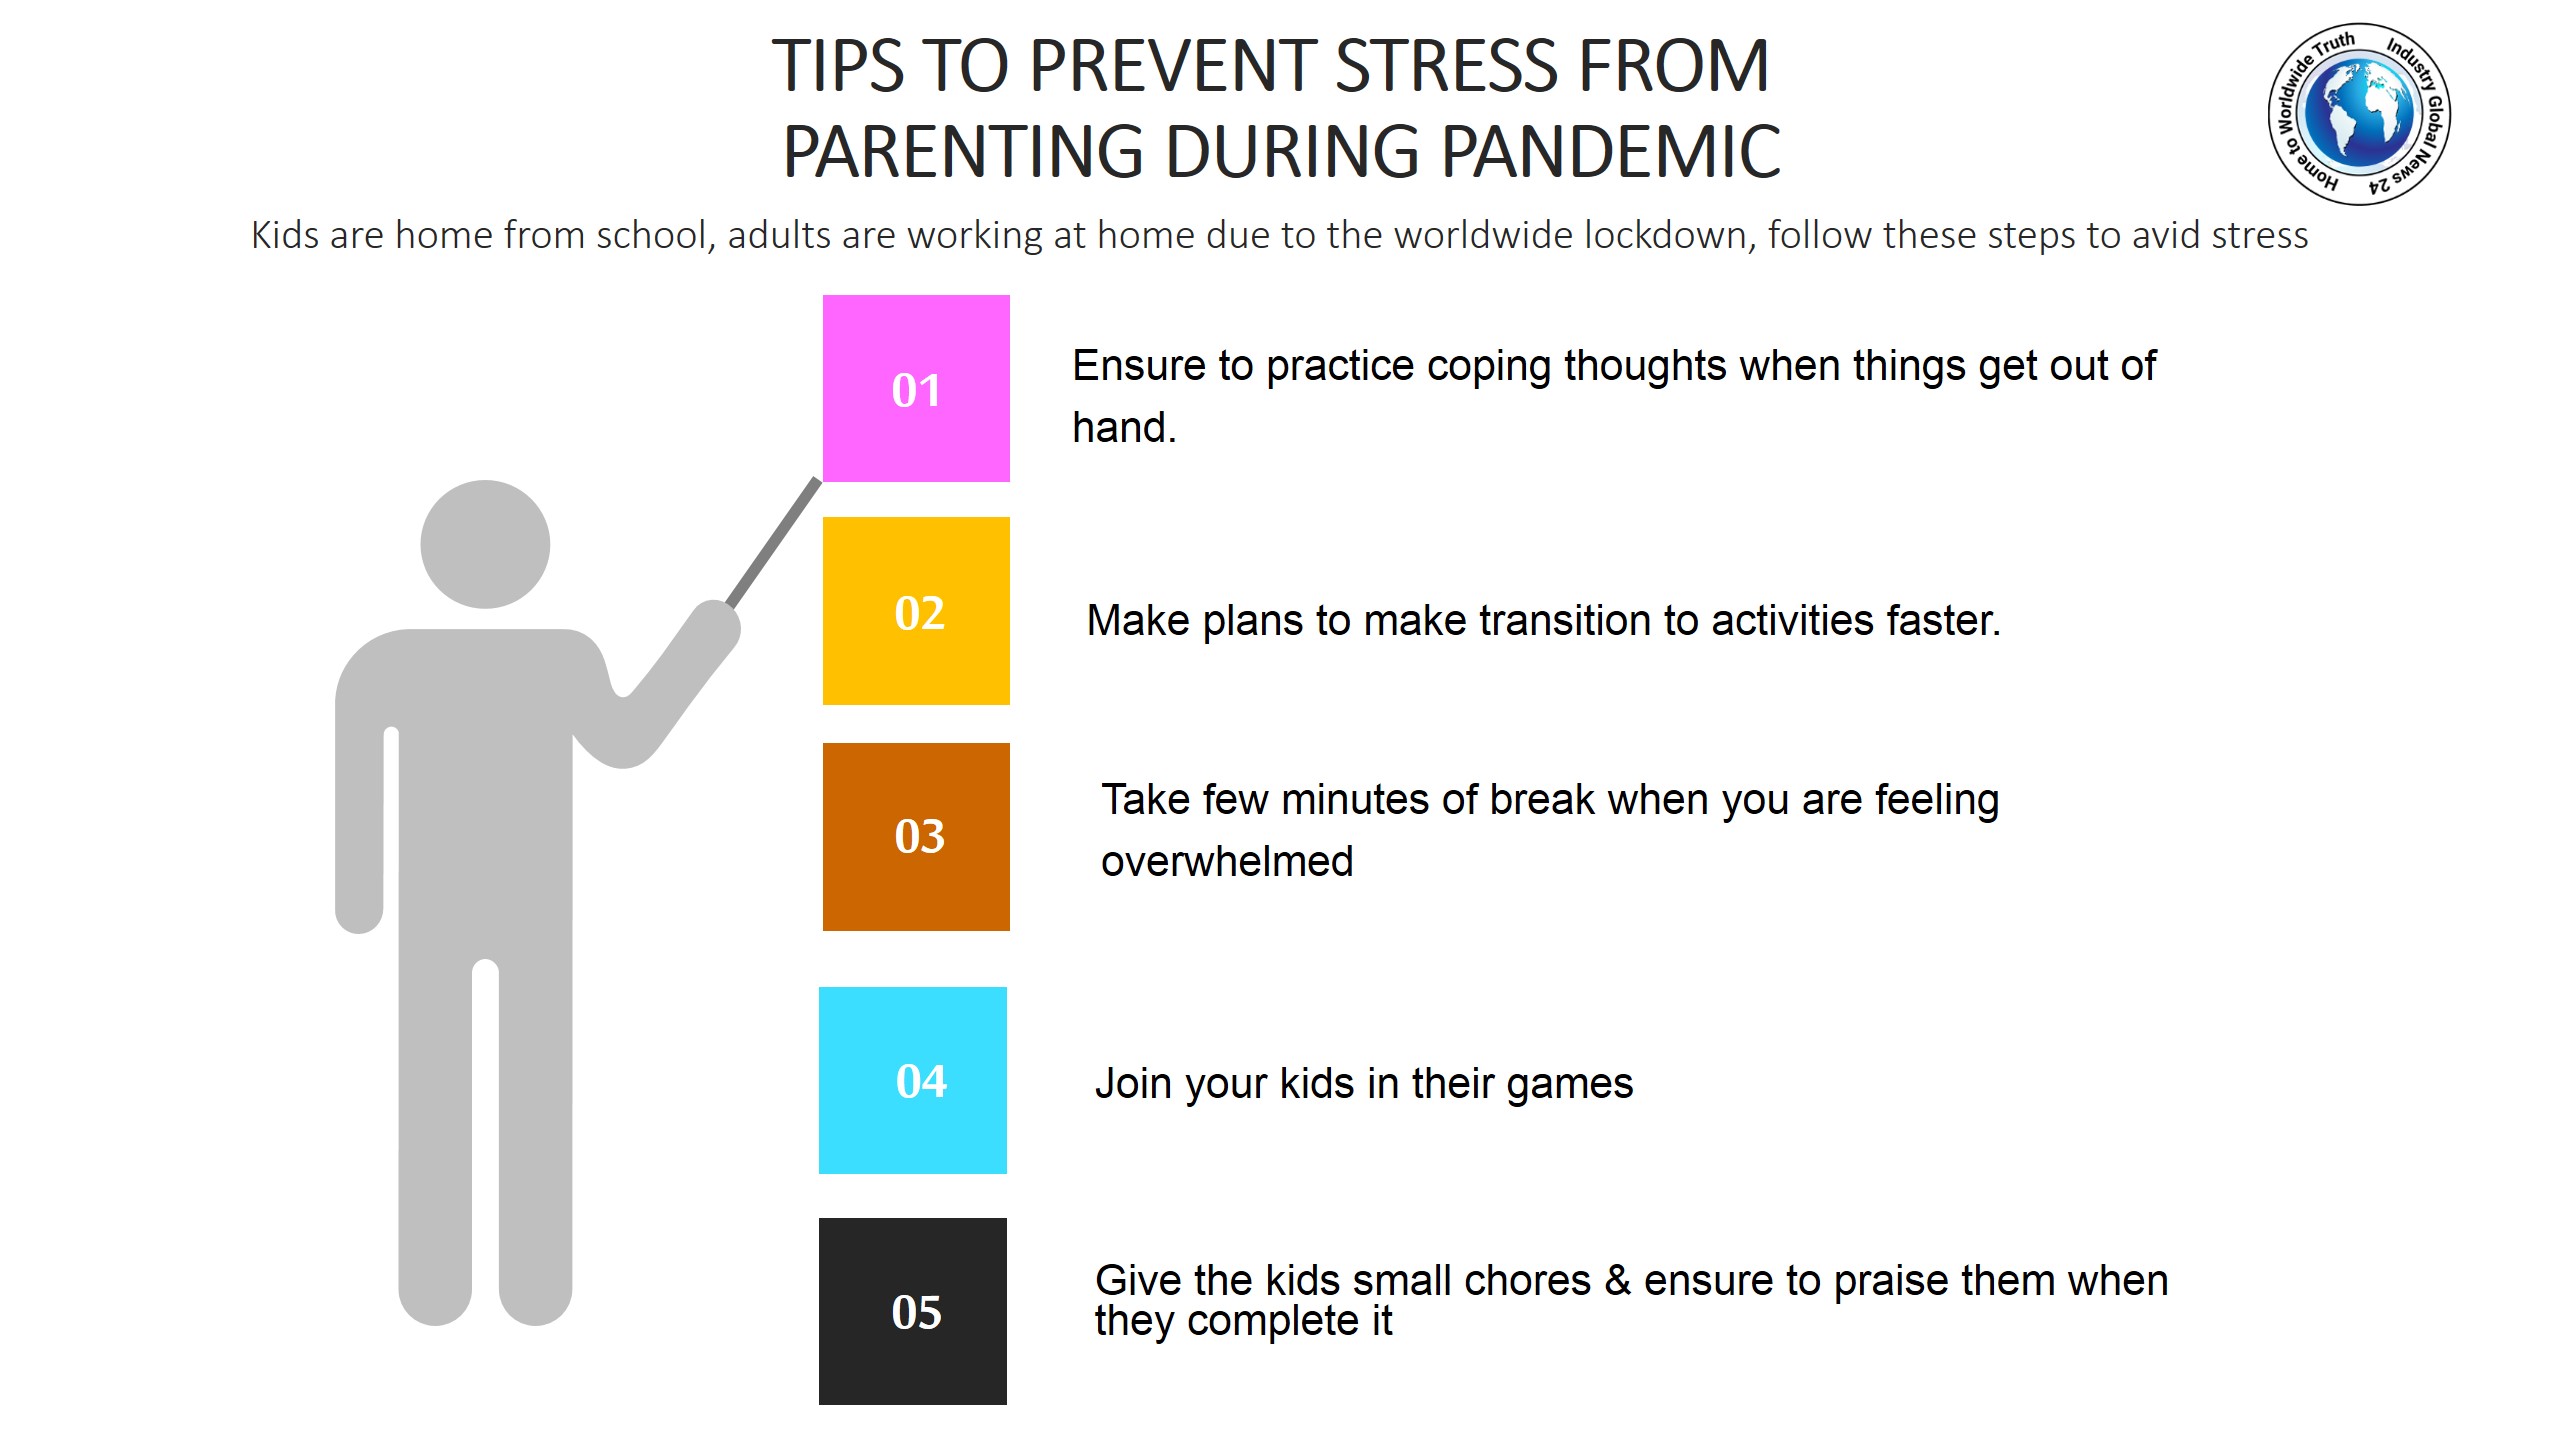 Tips to prevent stress from parenting during pandemic